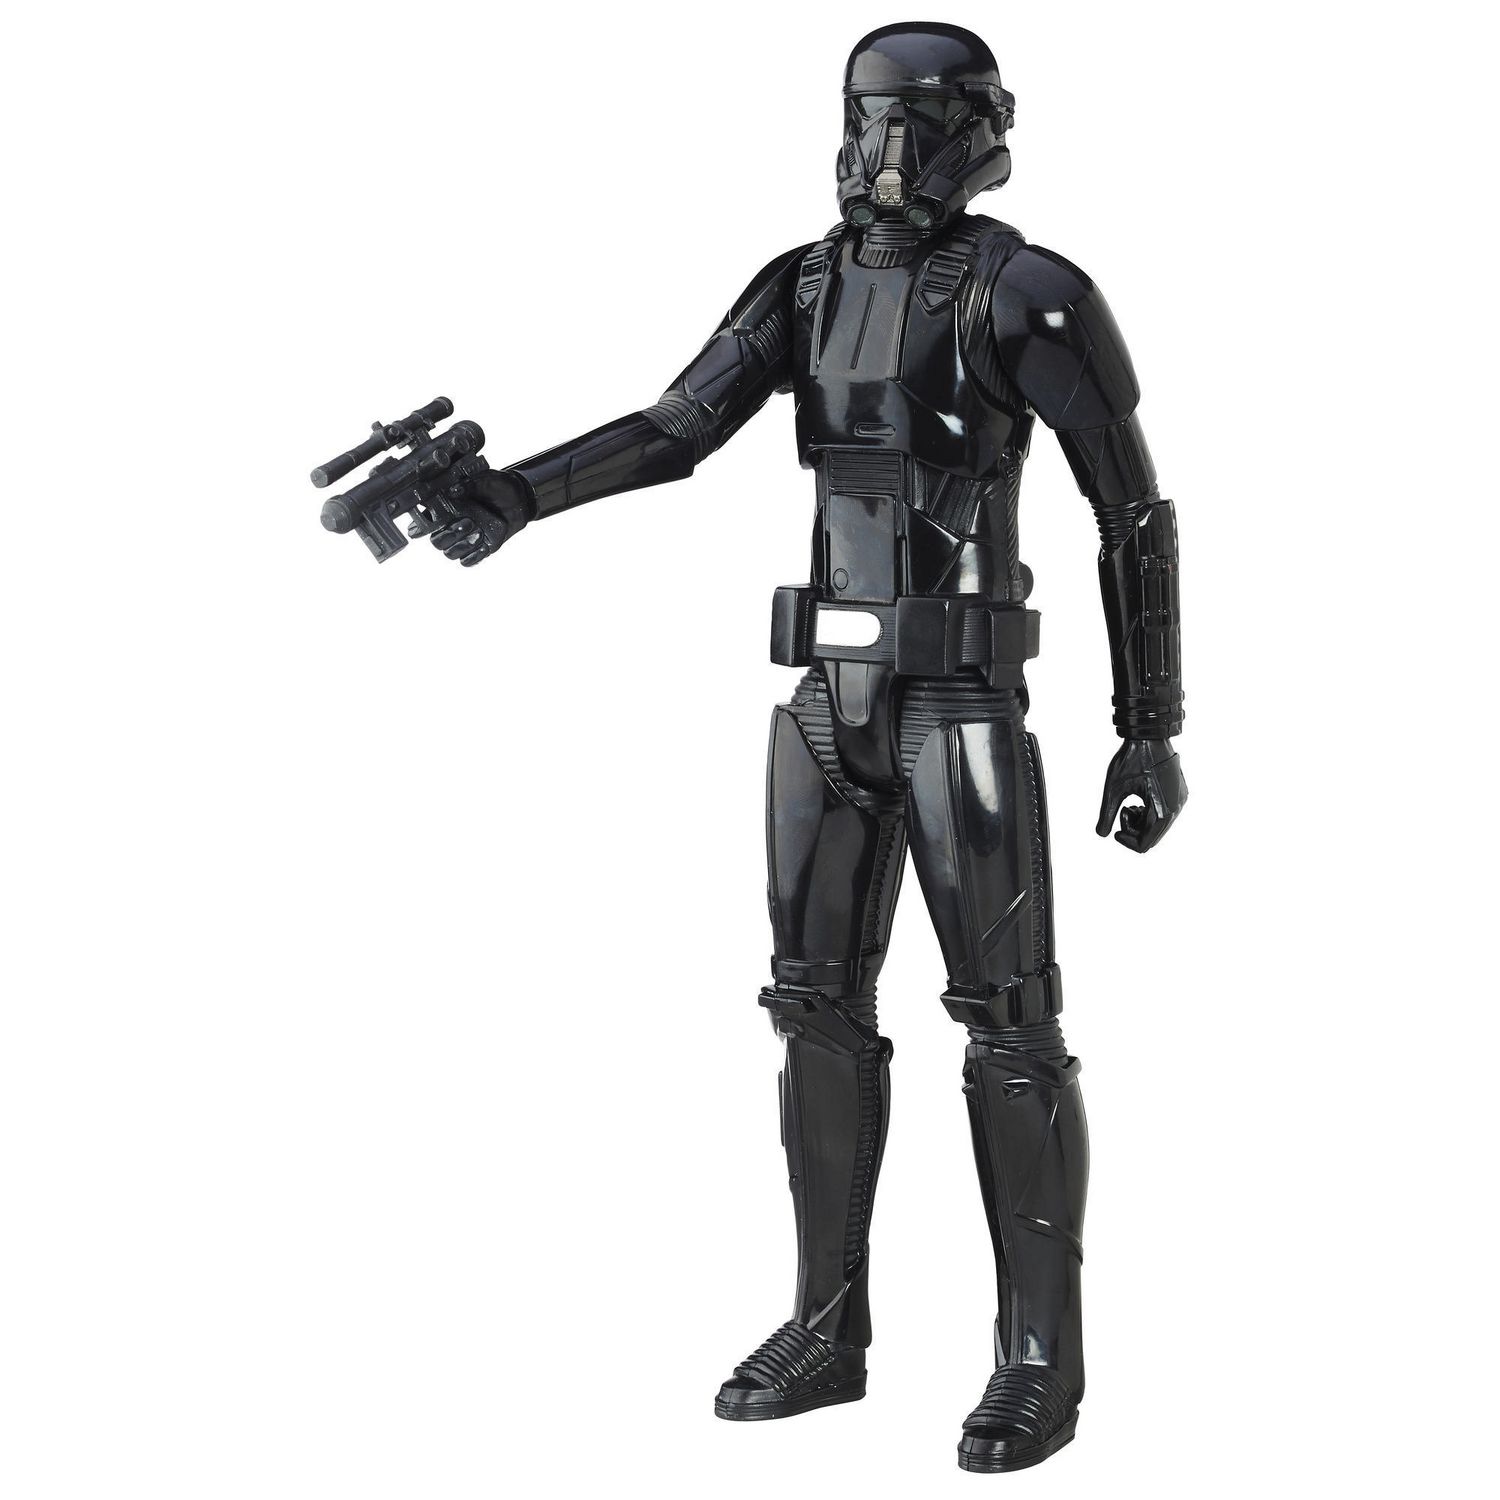 Hasbro Star Wars Rogue One Electronic Duel Imperial Death Trooper Action Figure for sale online